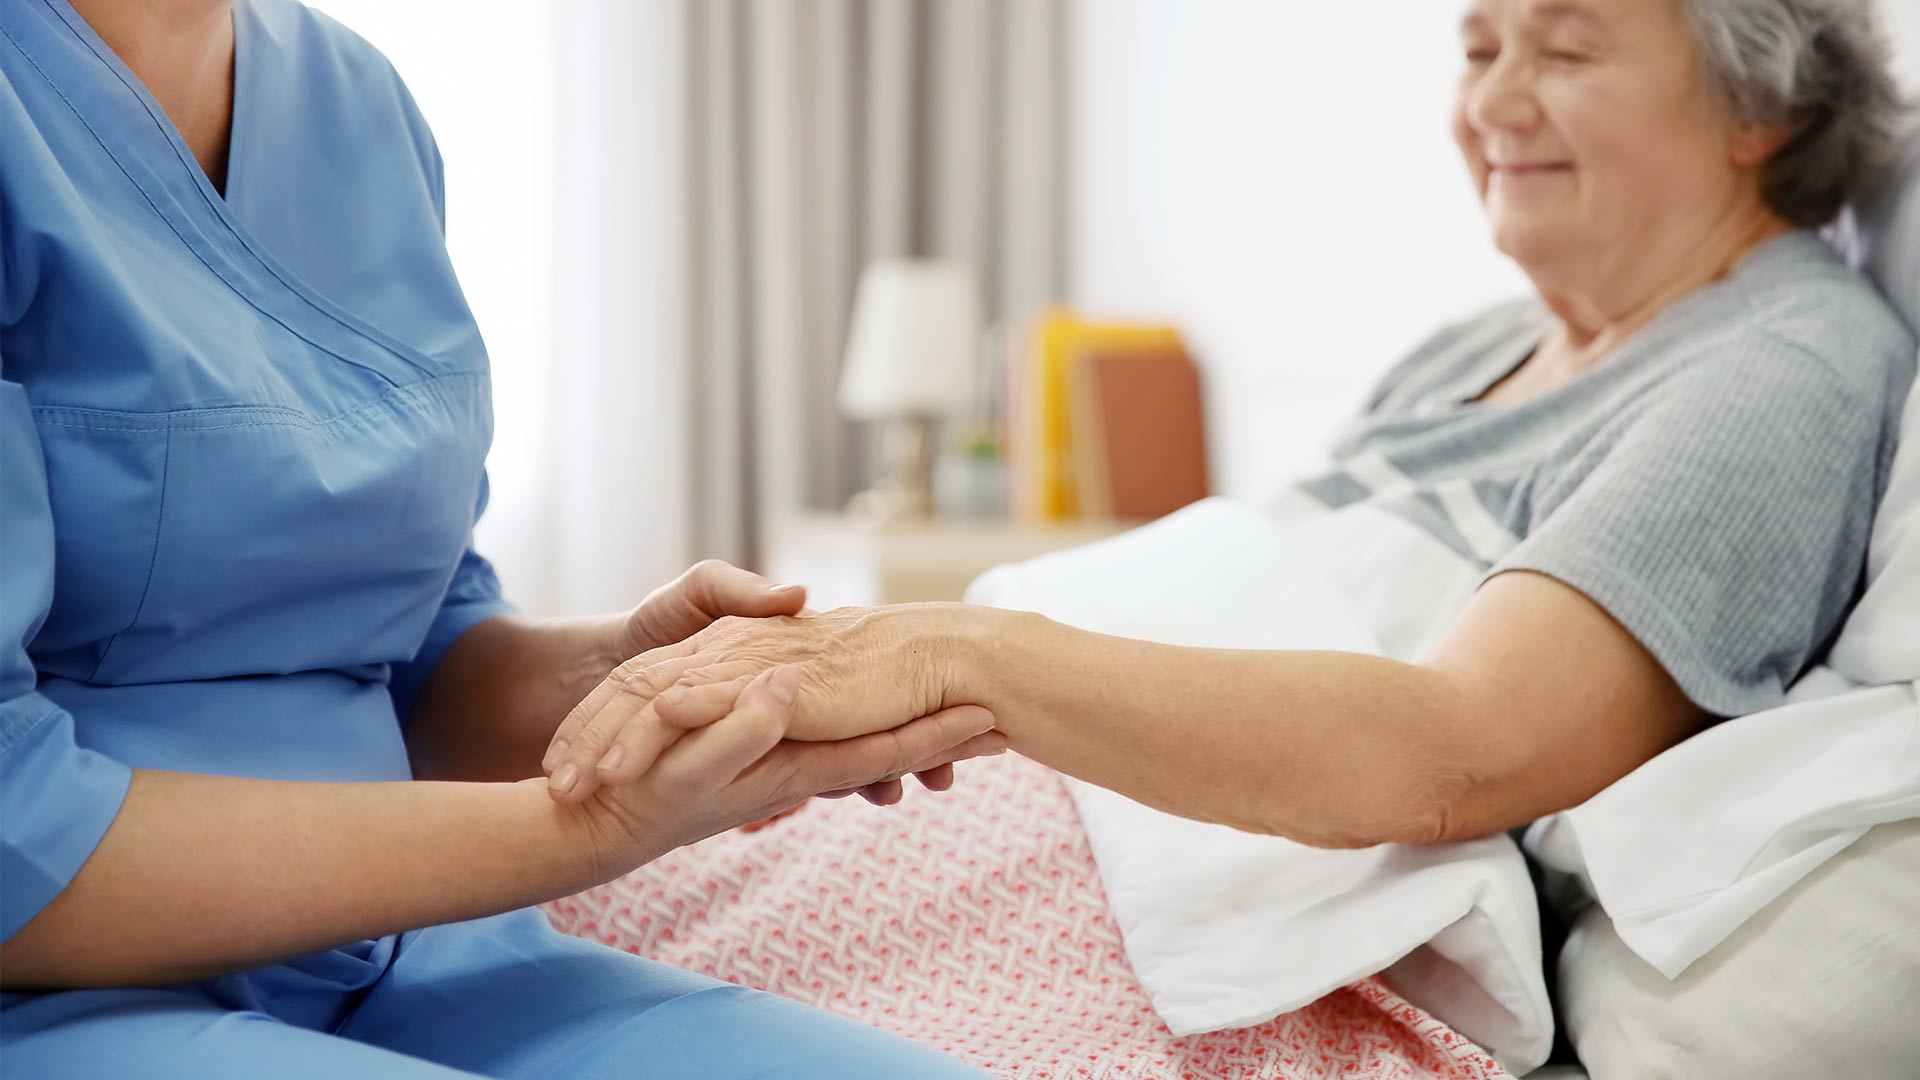 Infection prevention and control are key aspects of patient care.